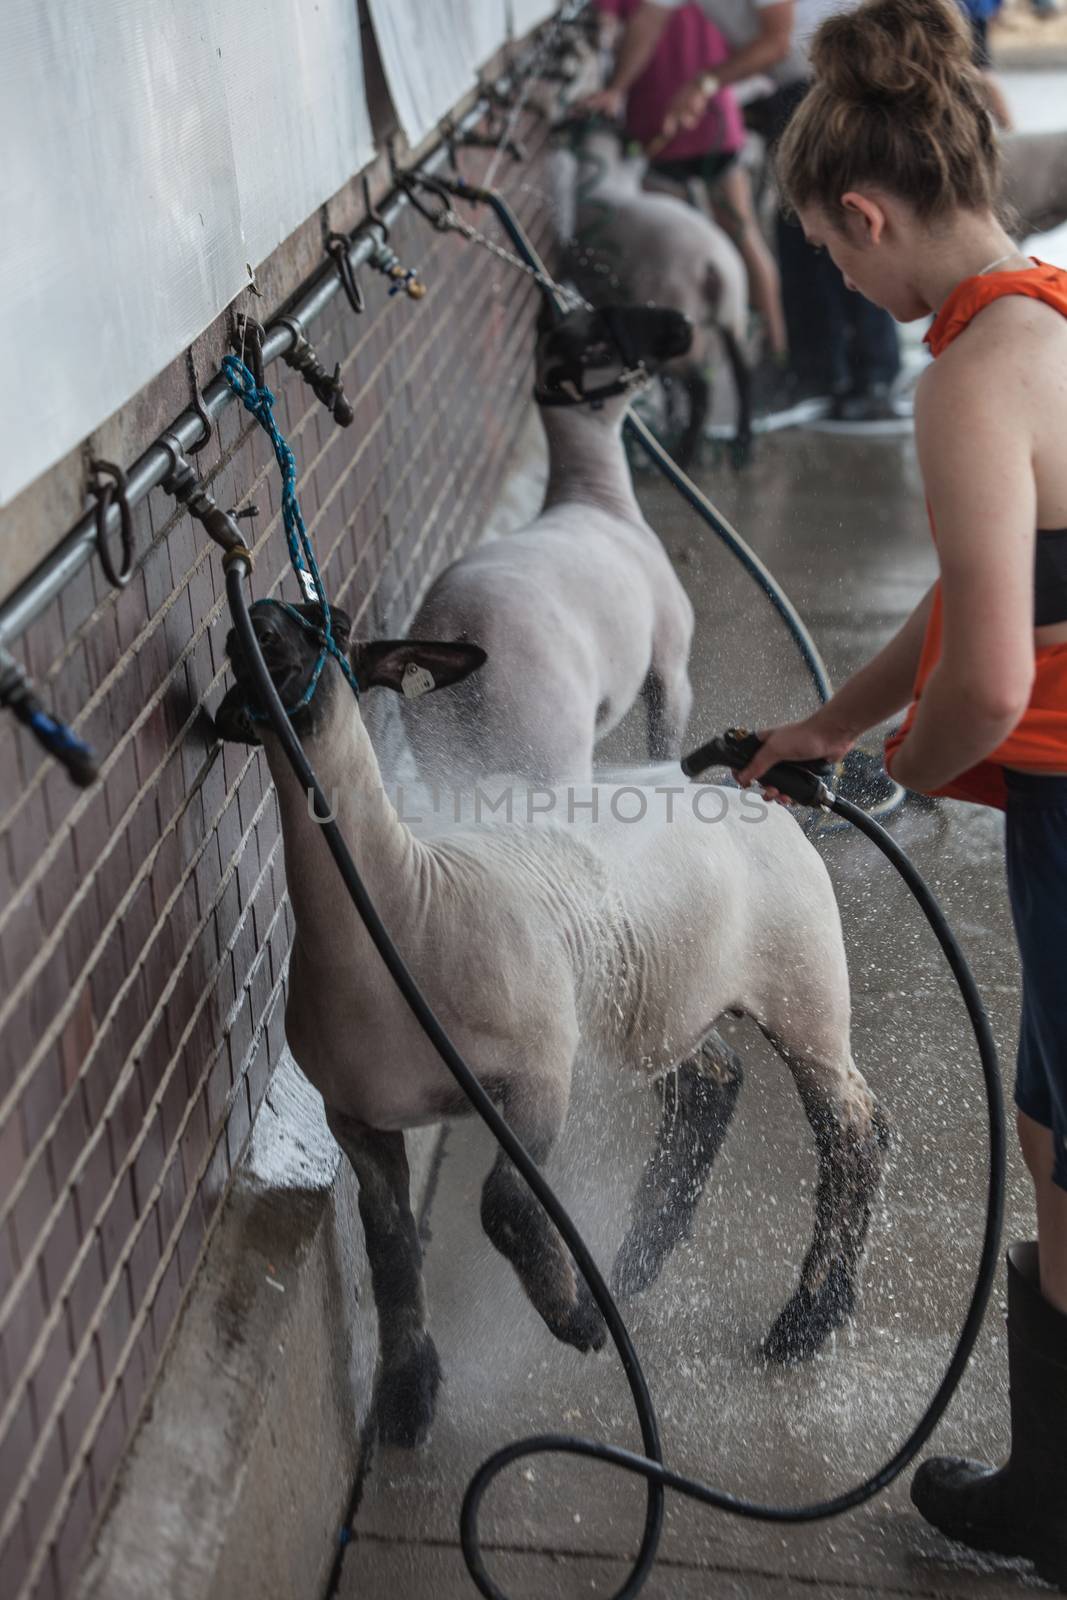 DES MOINES, IA /USA - AUGUST 10: Unidentified girl washing sheep at Iowa State Fair on August 10, 2014 in Des Moines, Iowa, USA.